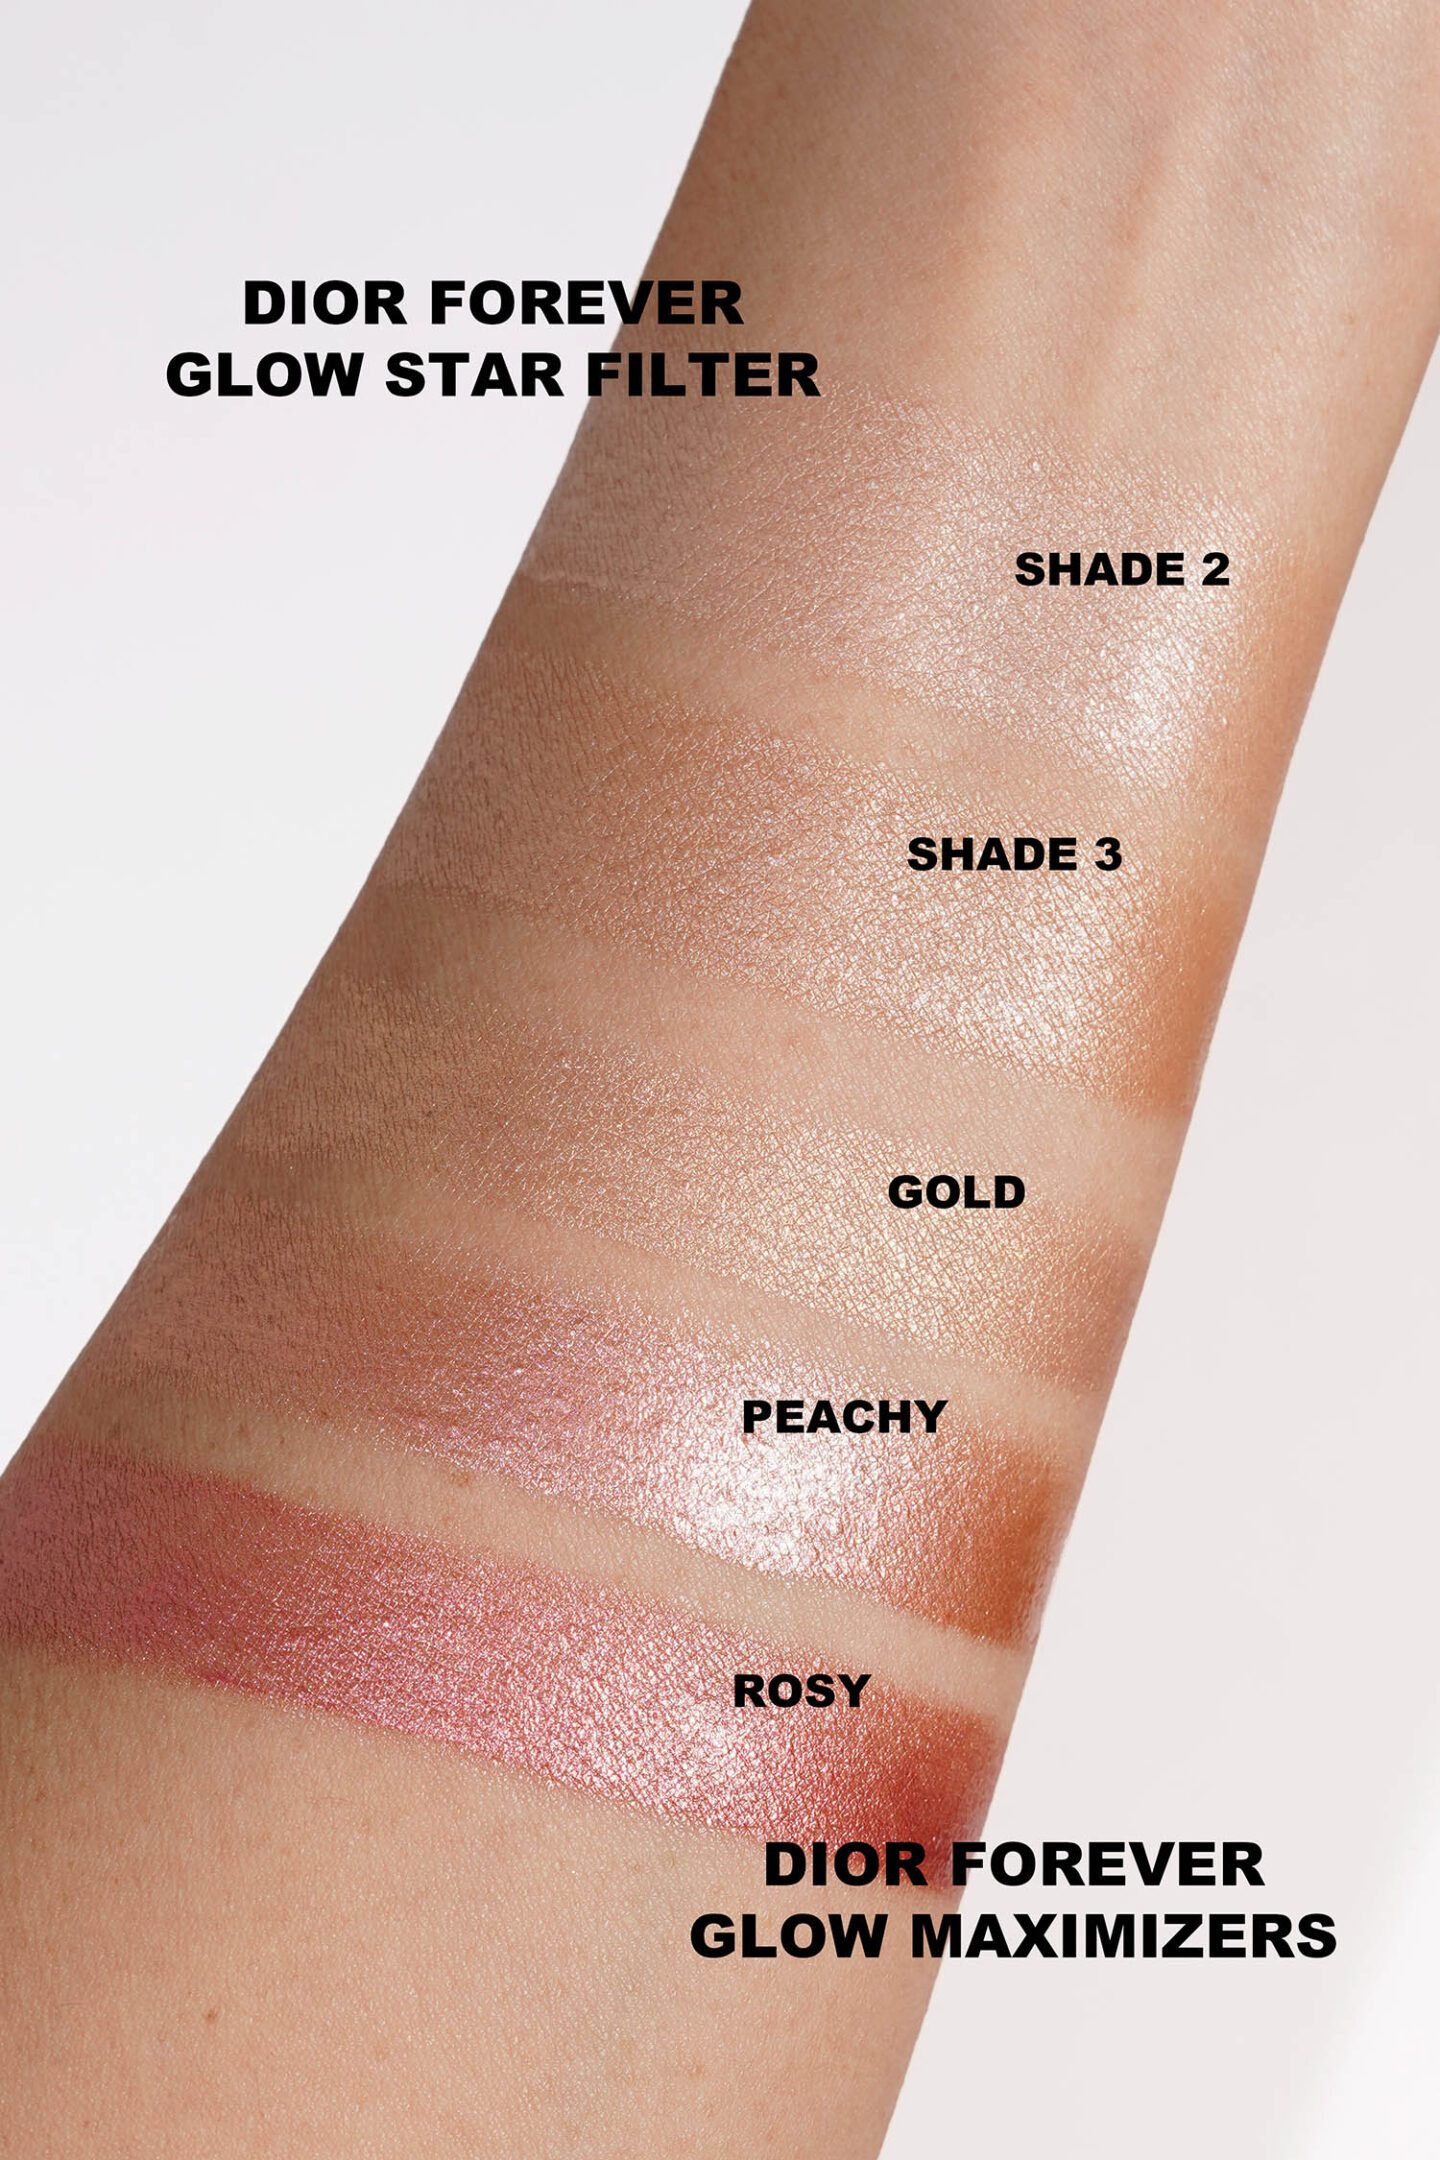 Dior Beauty Forever Glow Star Filter & Maximizer swatches